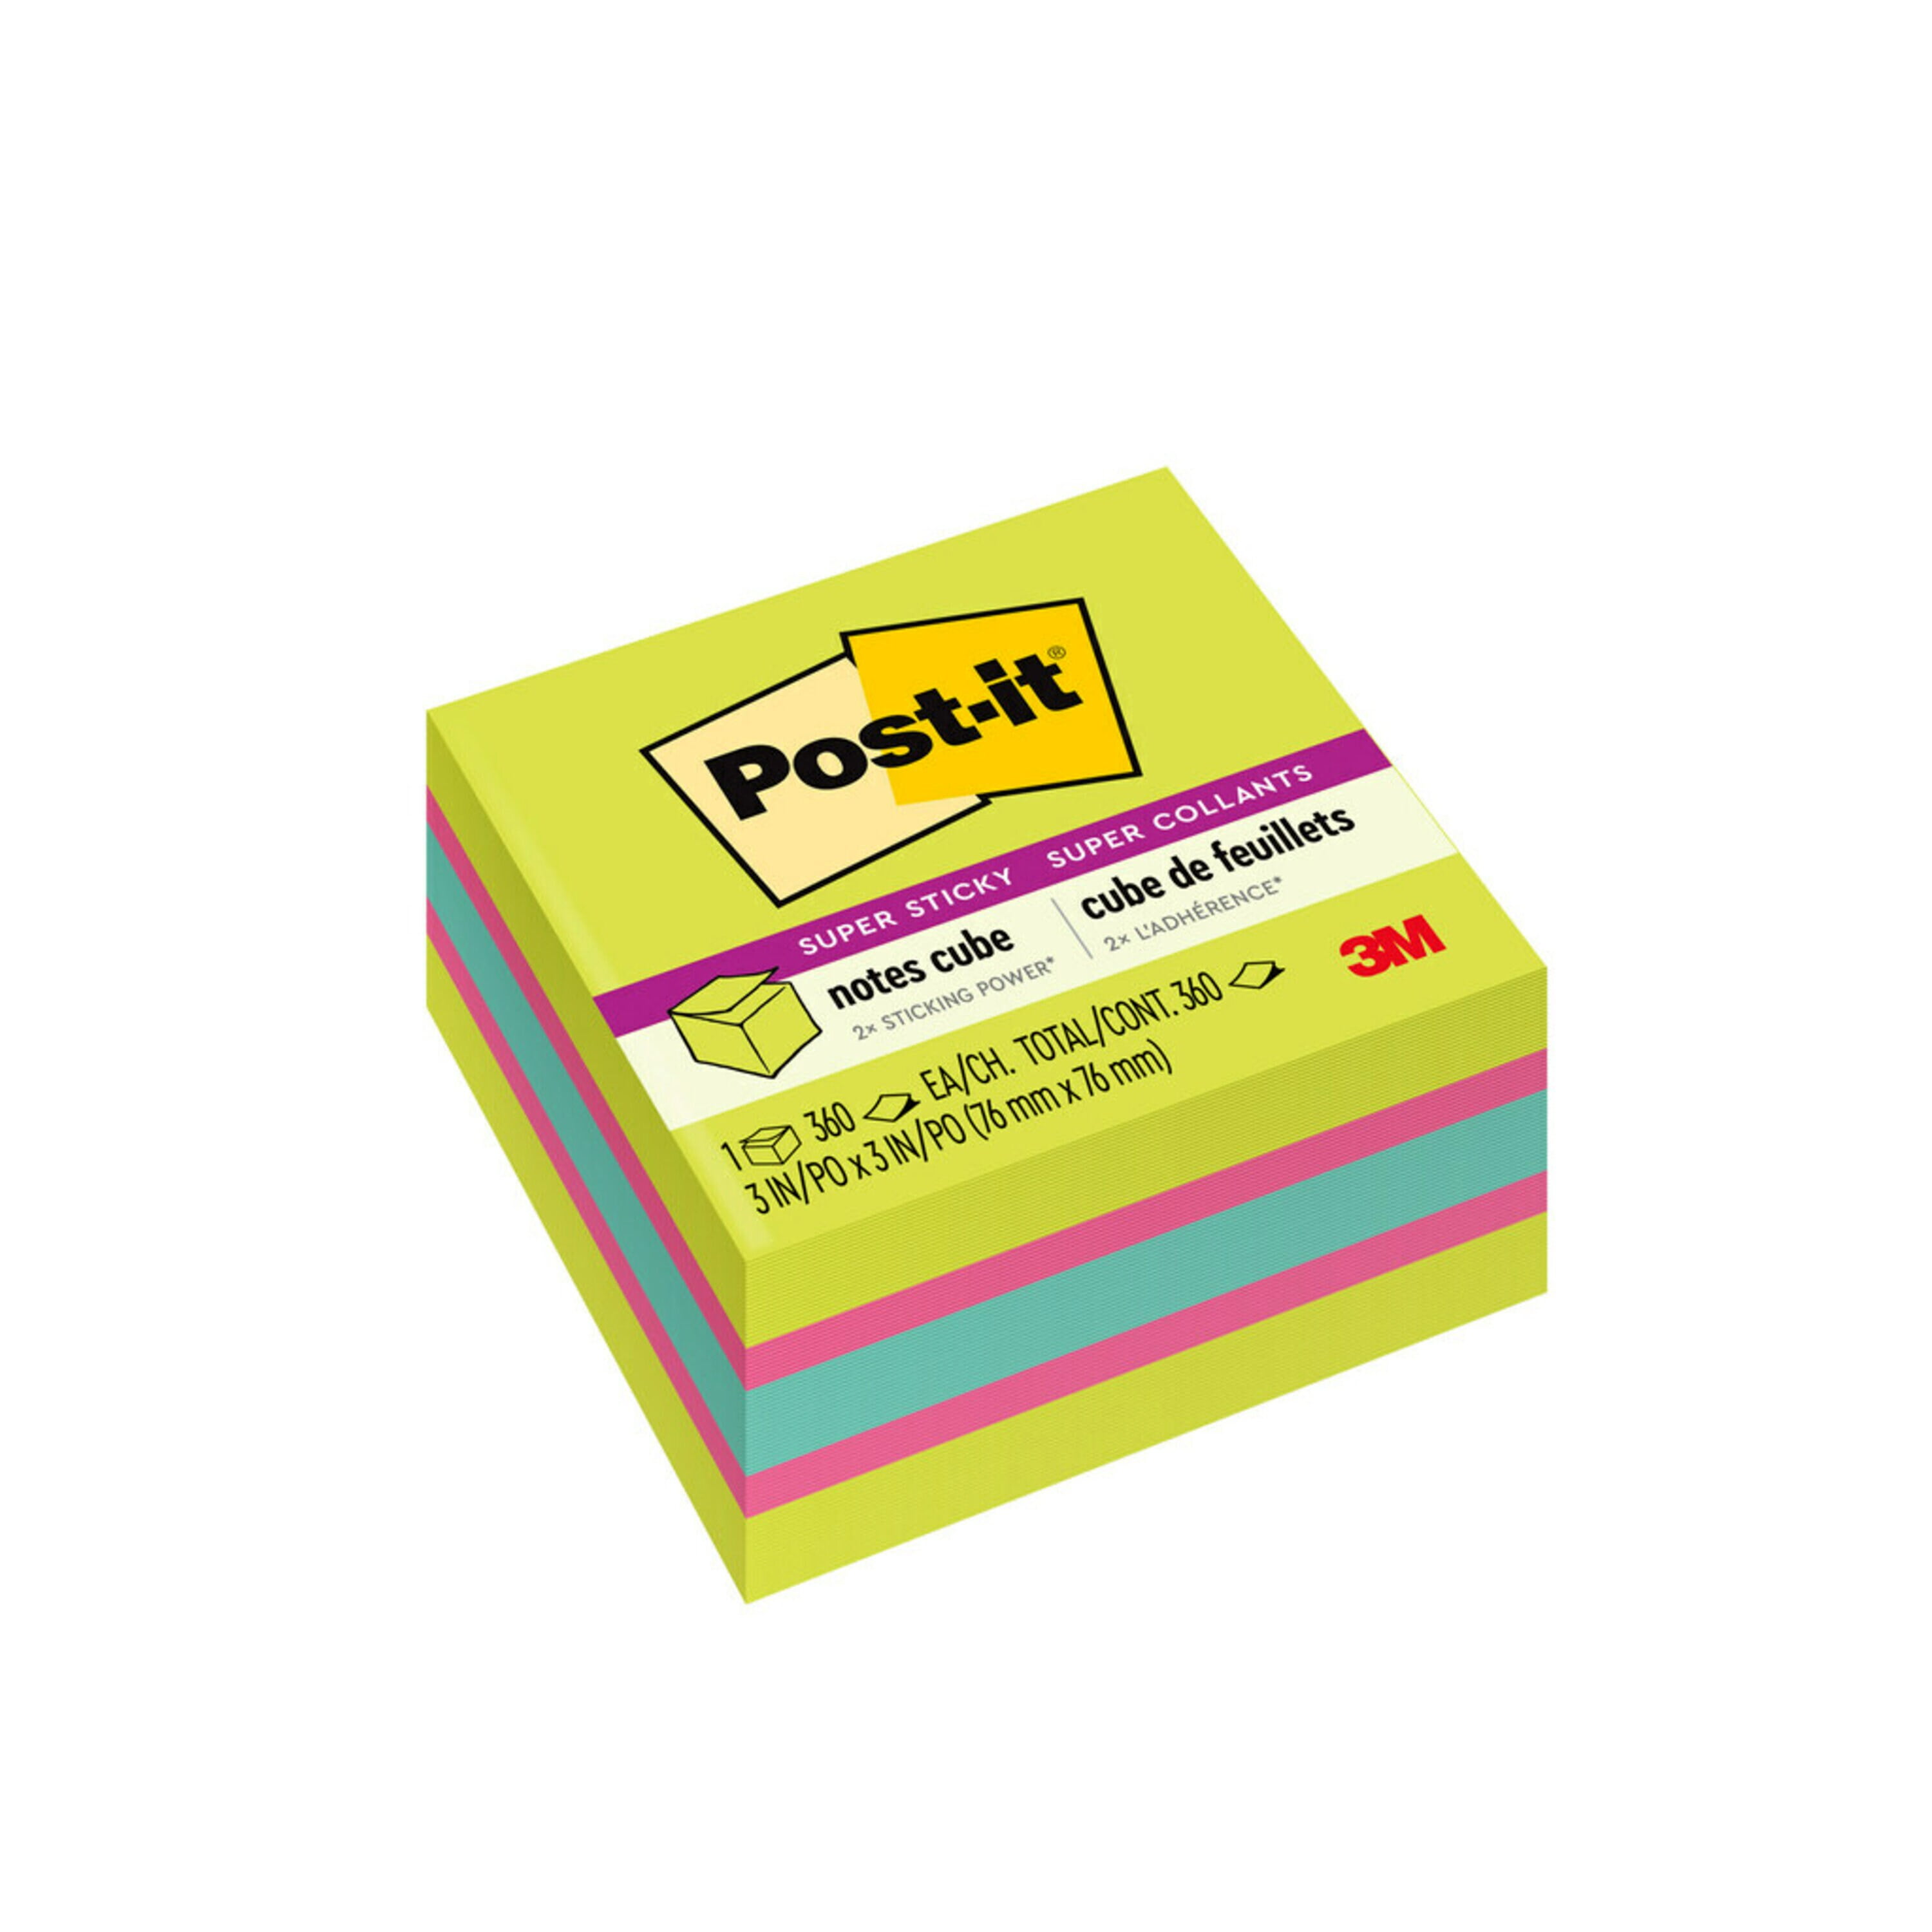 Post-it Super Sticky Notes Cube, 3 in x 3 in, Bright Colors, 1 Cube